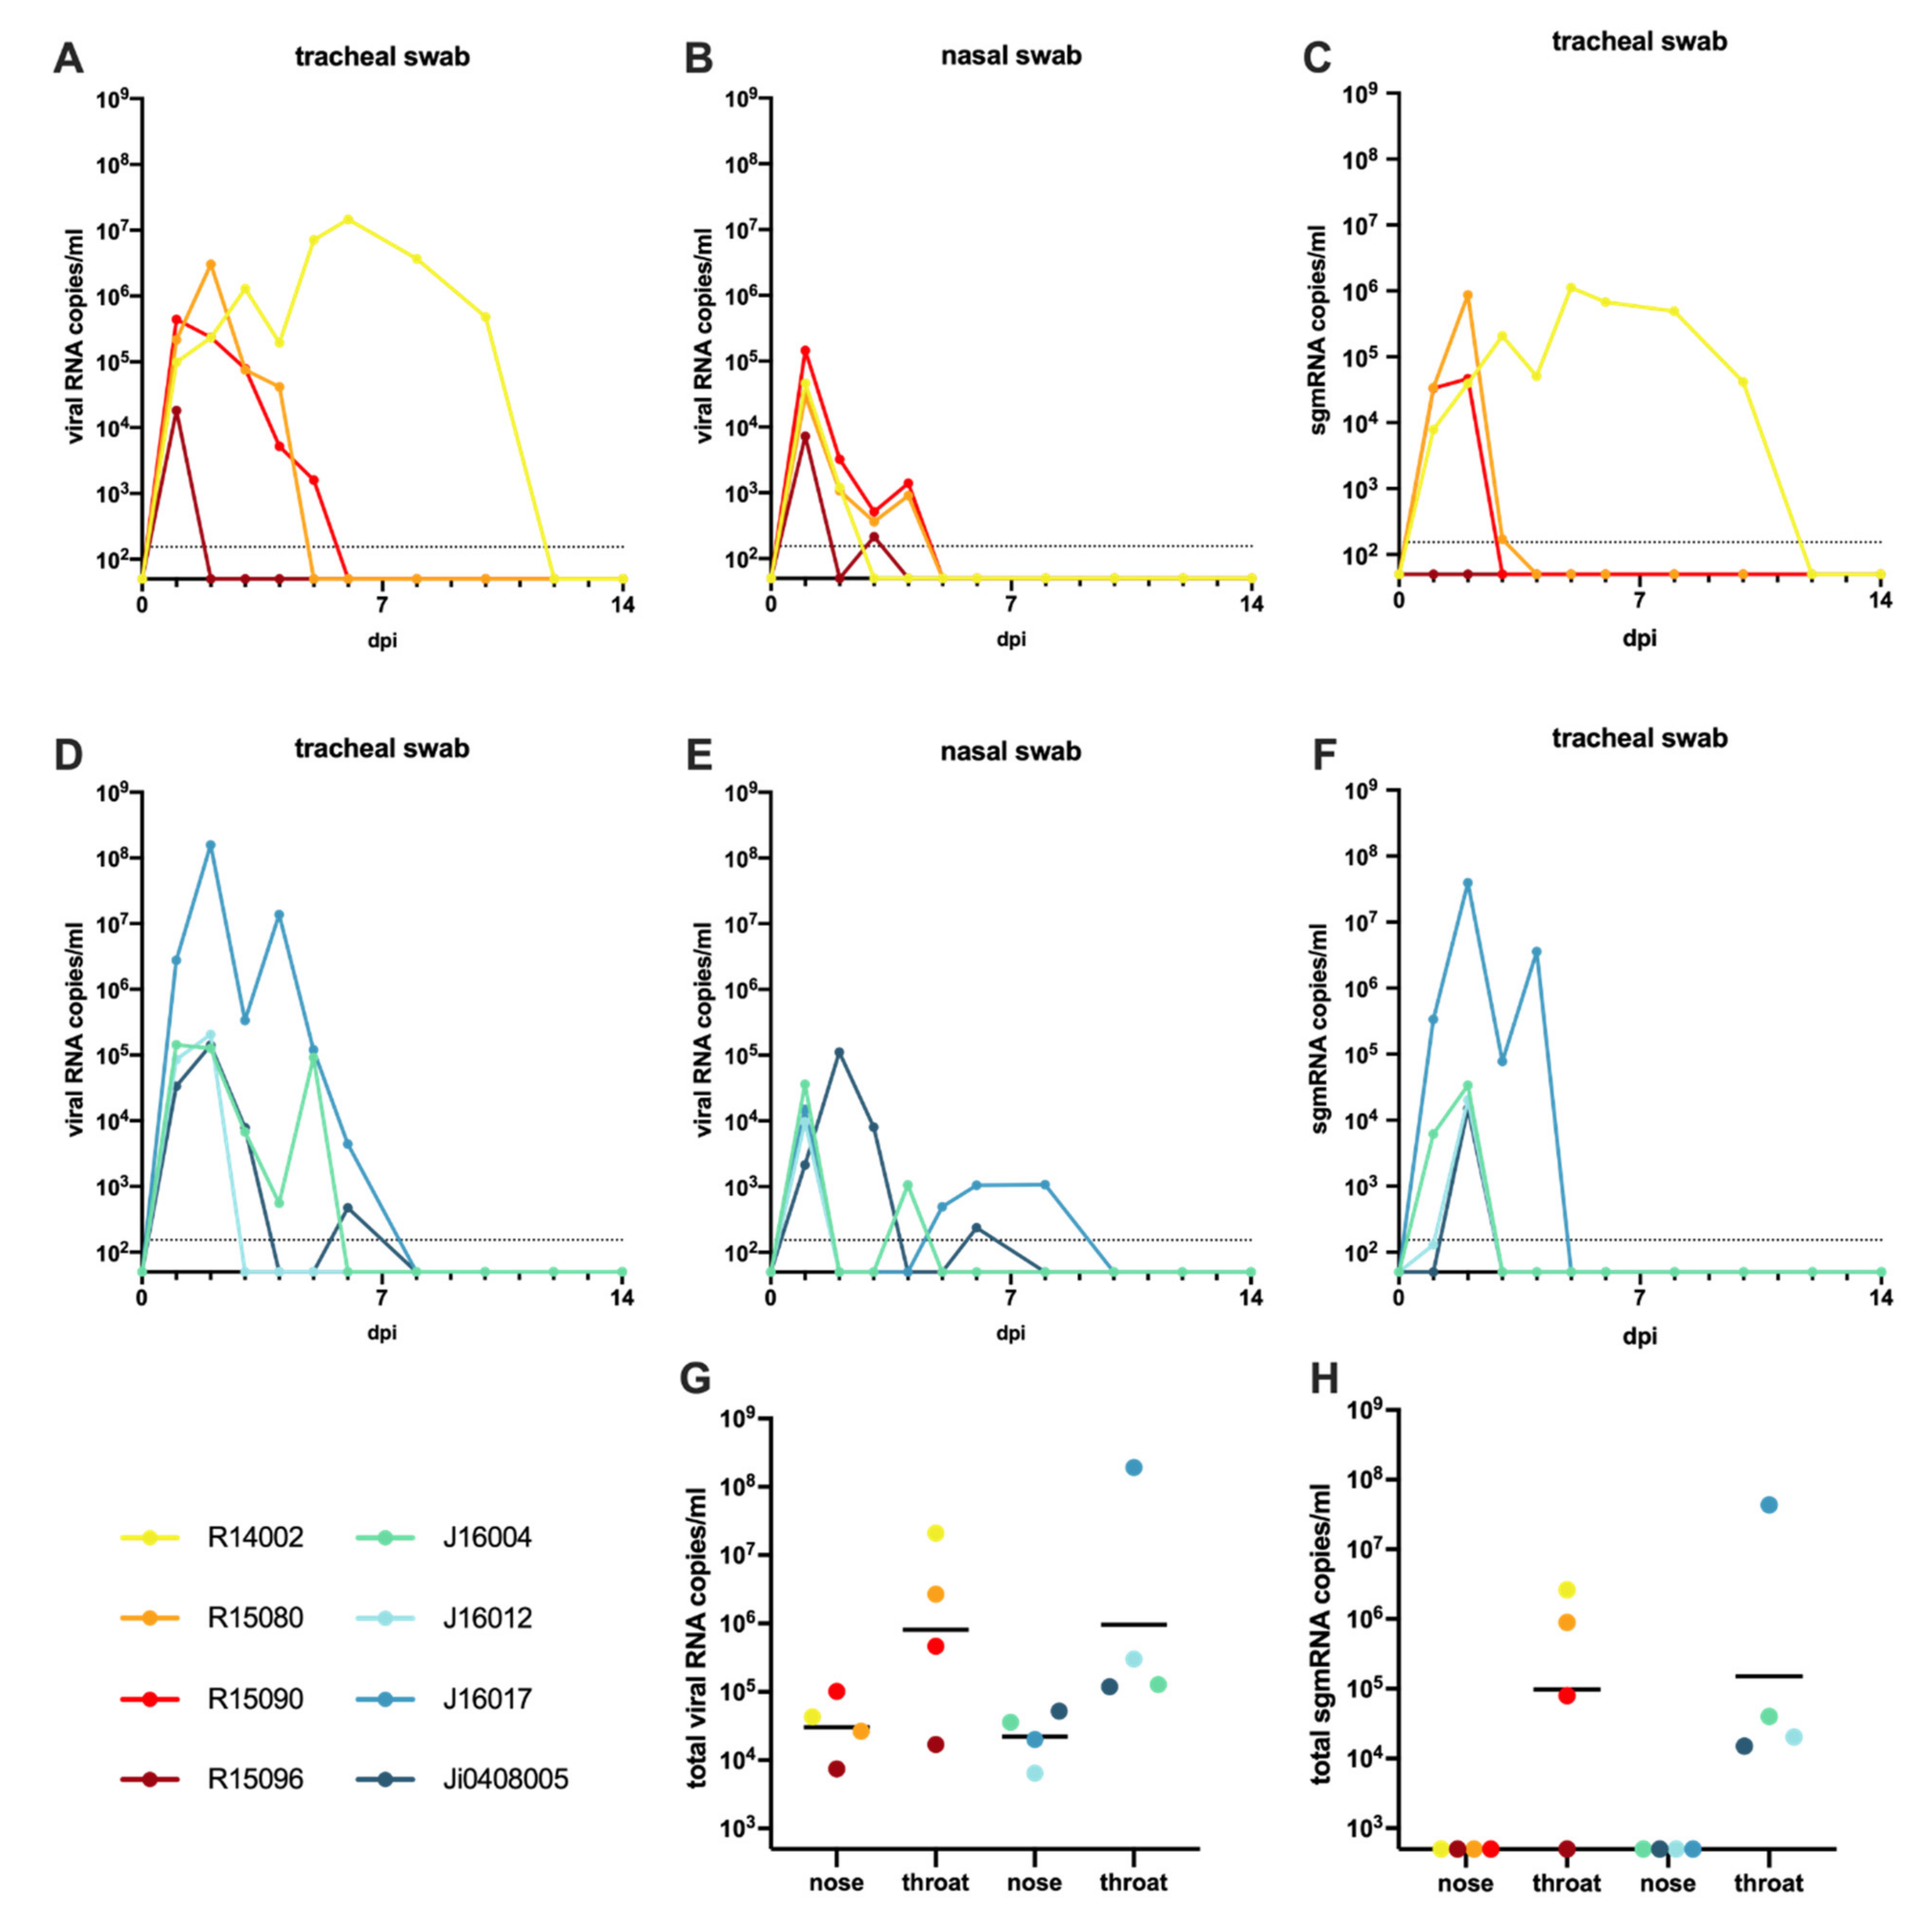 Viruses | Free Full-Text | The Post-Acute Phase of SARS-CoV-2 Infection in  Two Macaque Species Is Associated with Signs of Ongoing Virus Replication  and Pathology in Pulmonary and Extrapulmonary Tissues | HTML